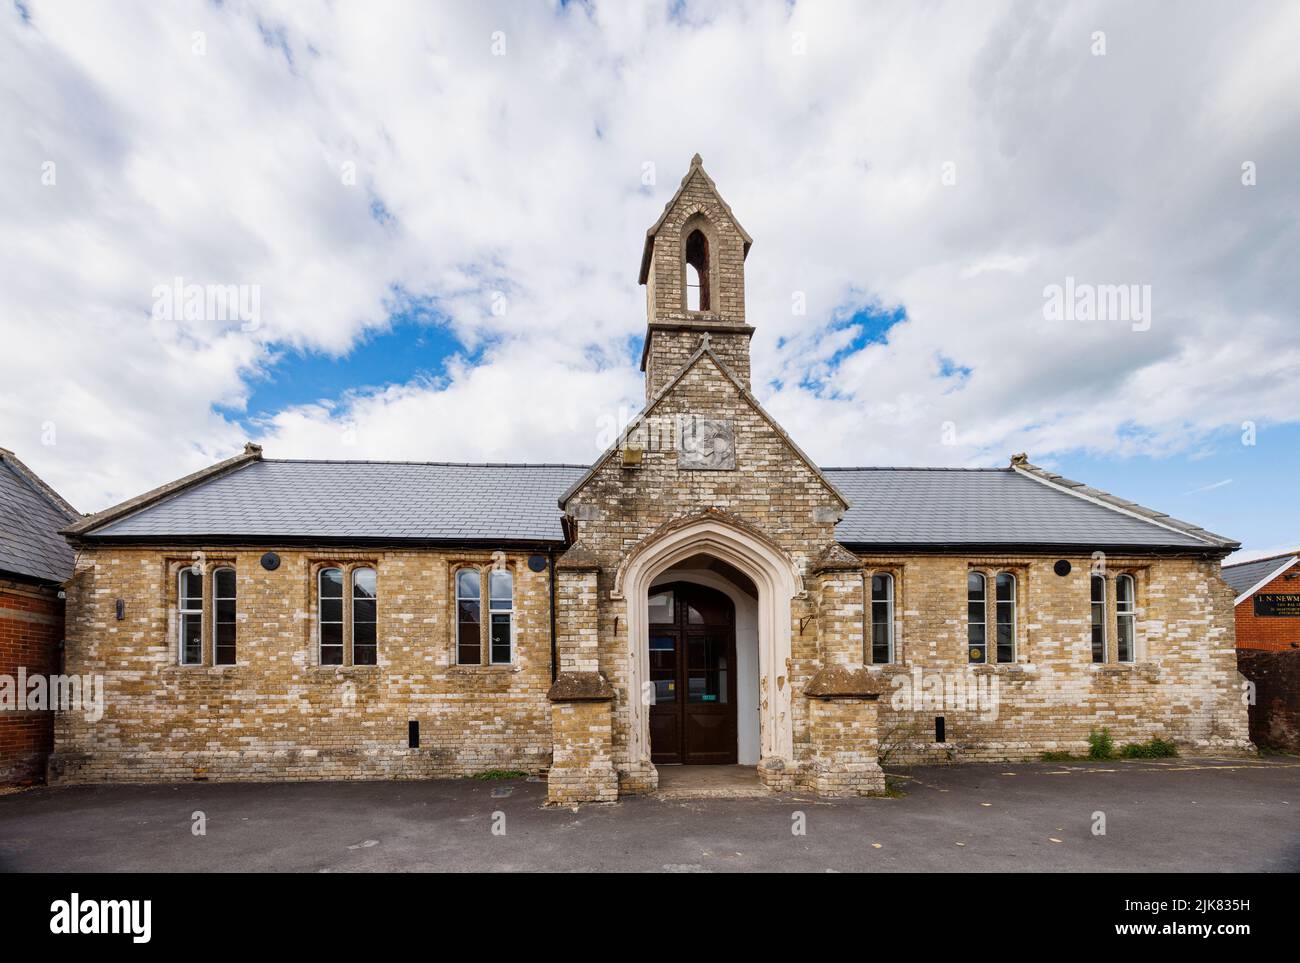 Avonway Community Centre, a former school dating from 1834 in Shaftesbury Street, Fordingbridge, a small village in the New Forest, Hampshire Stock Photo